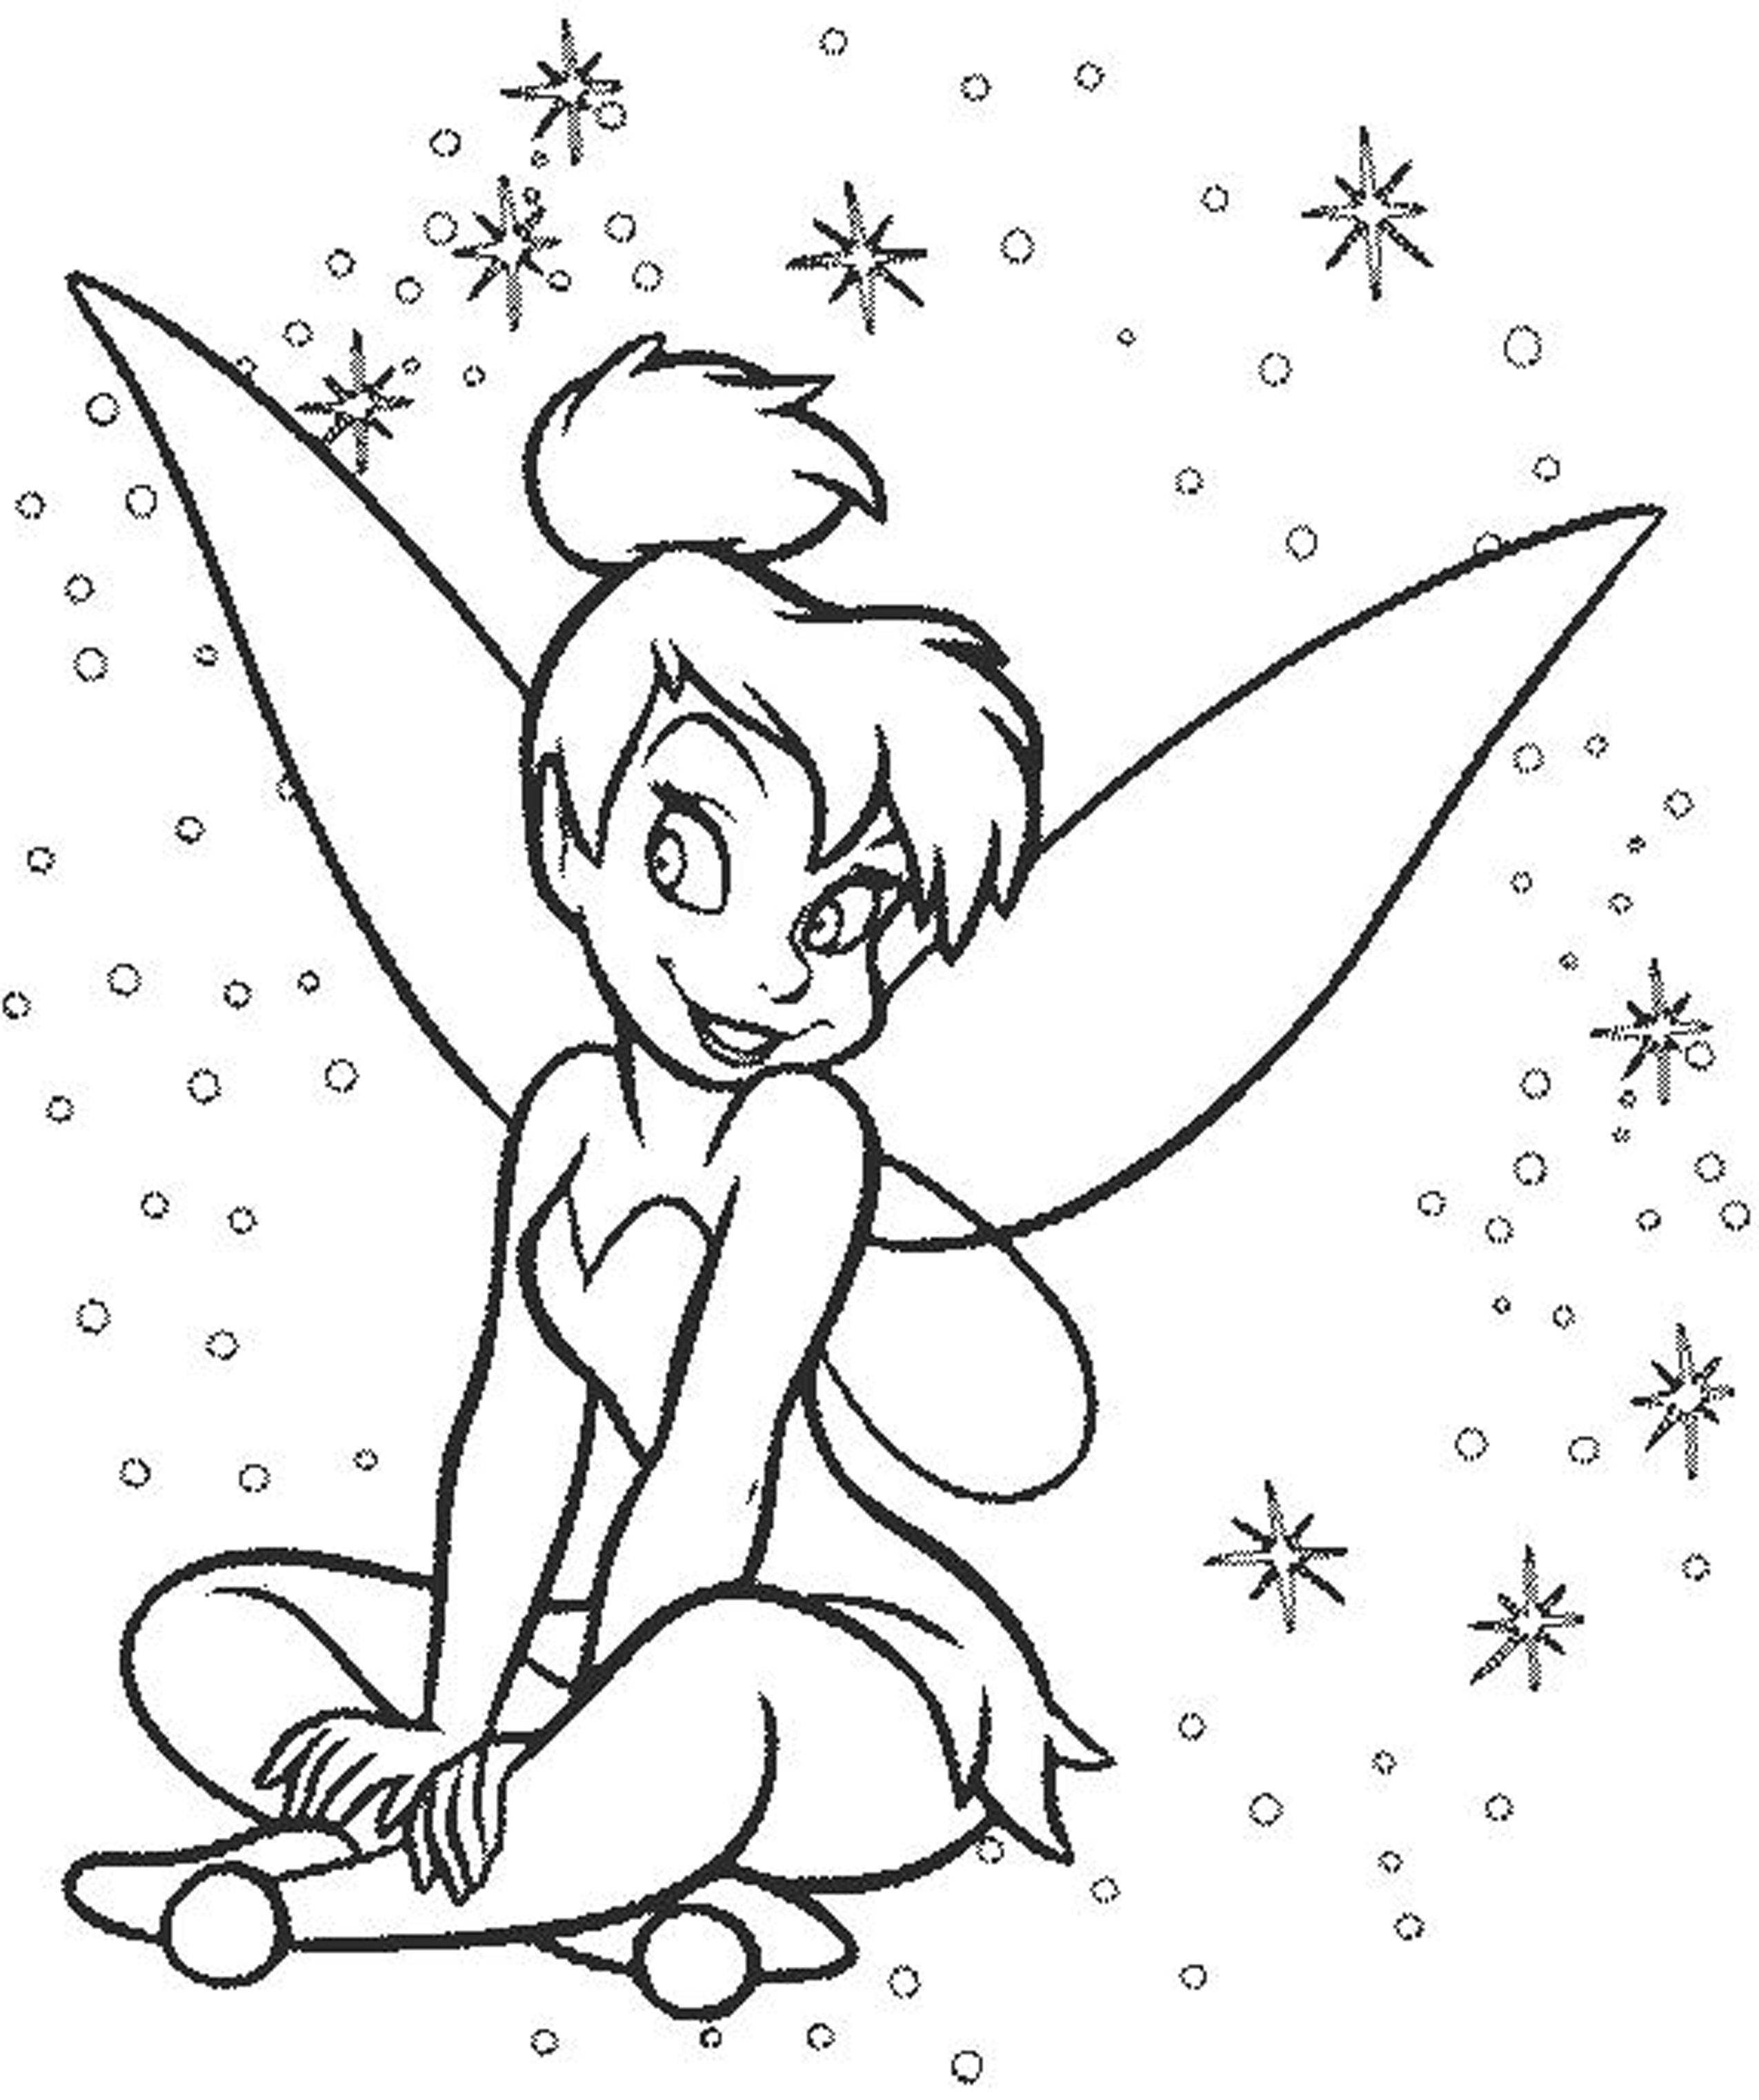 Simple Disney Coloring Pages at GetDrawings Free download